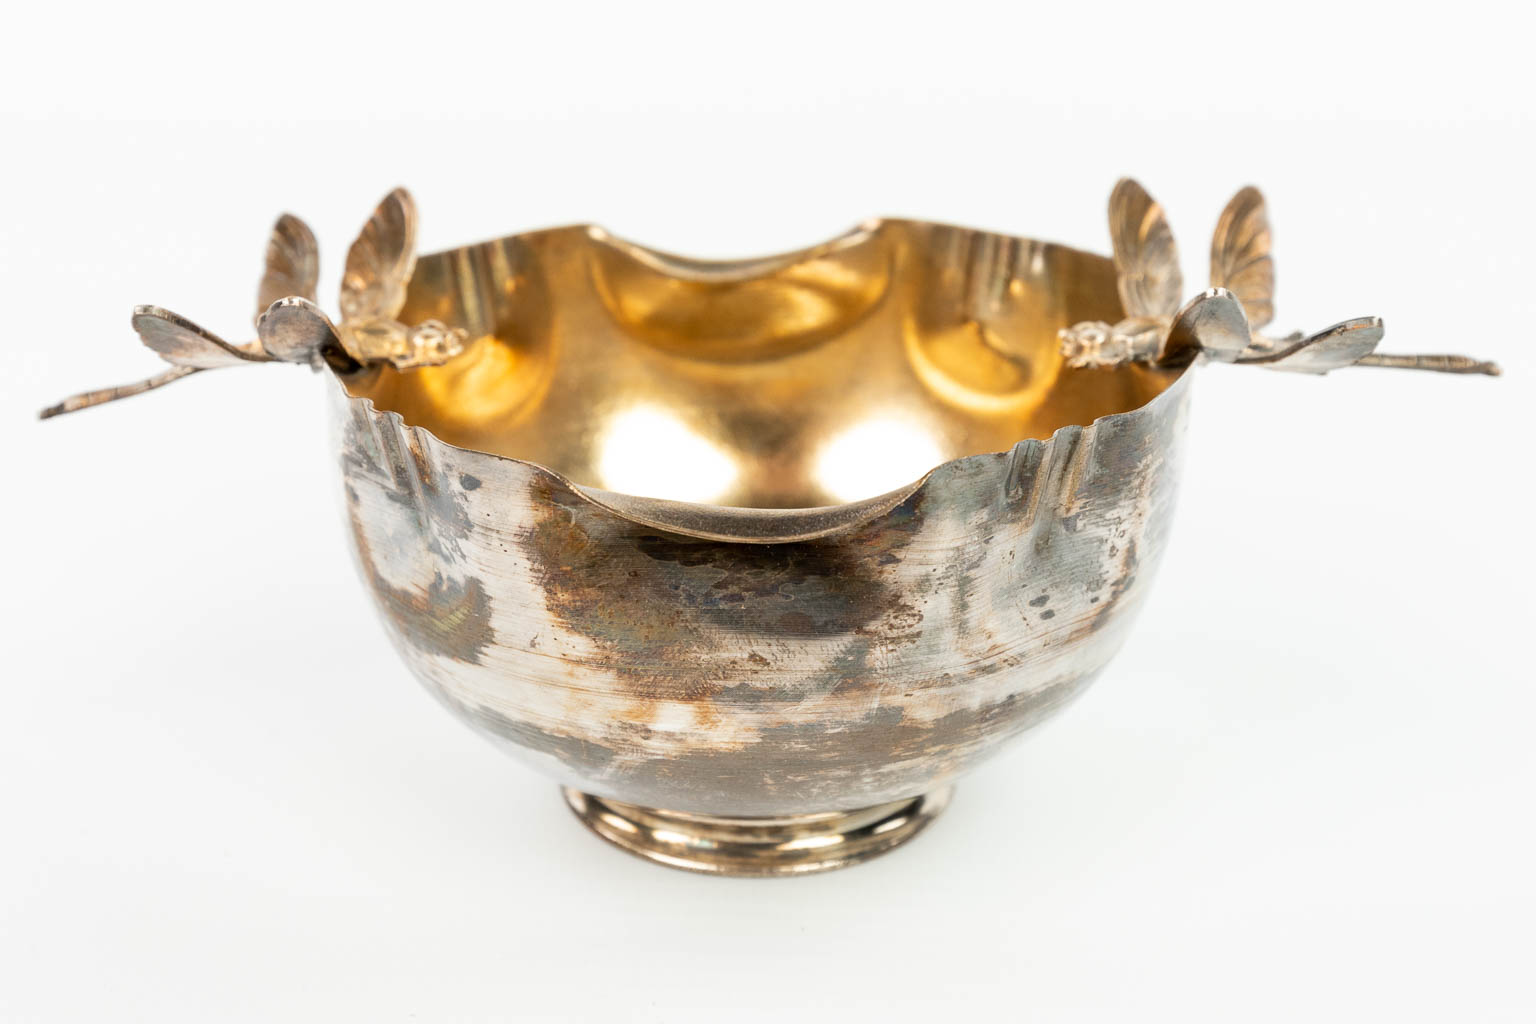 An art nouveau sugar bowl and sugar tong made of gold-plated metal, in the original box. (H:6,5cm)